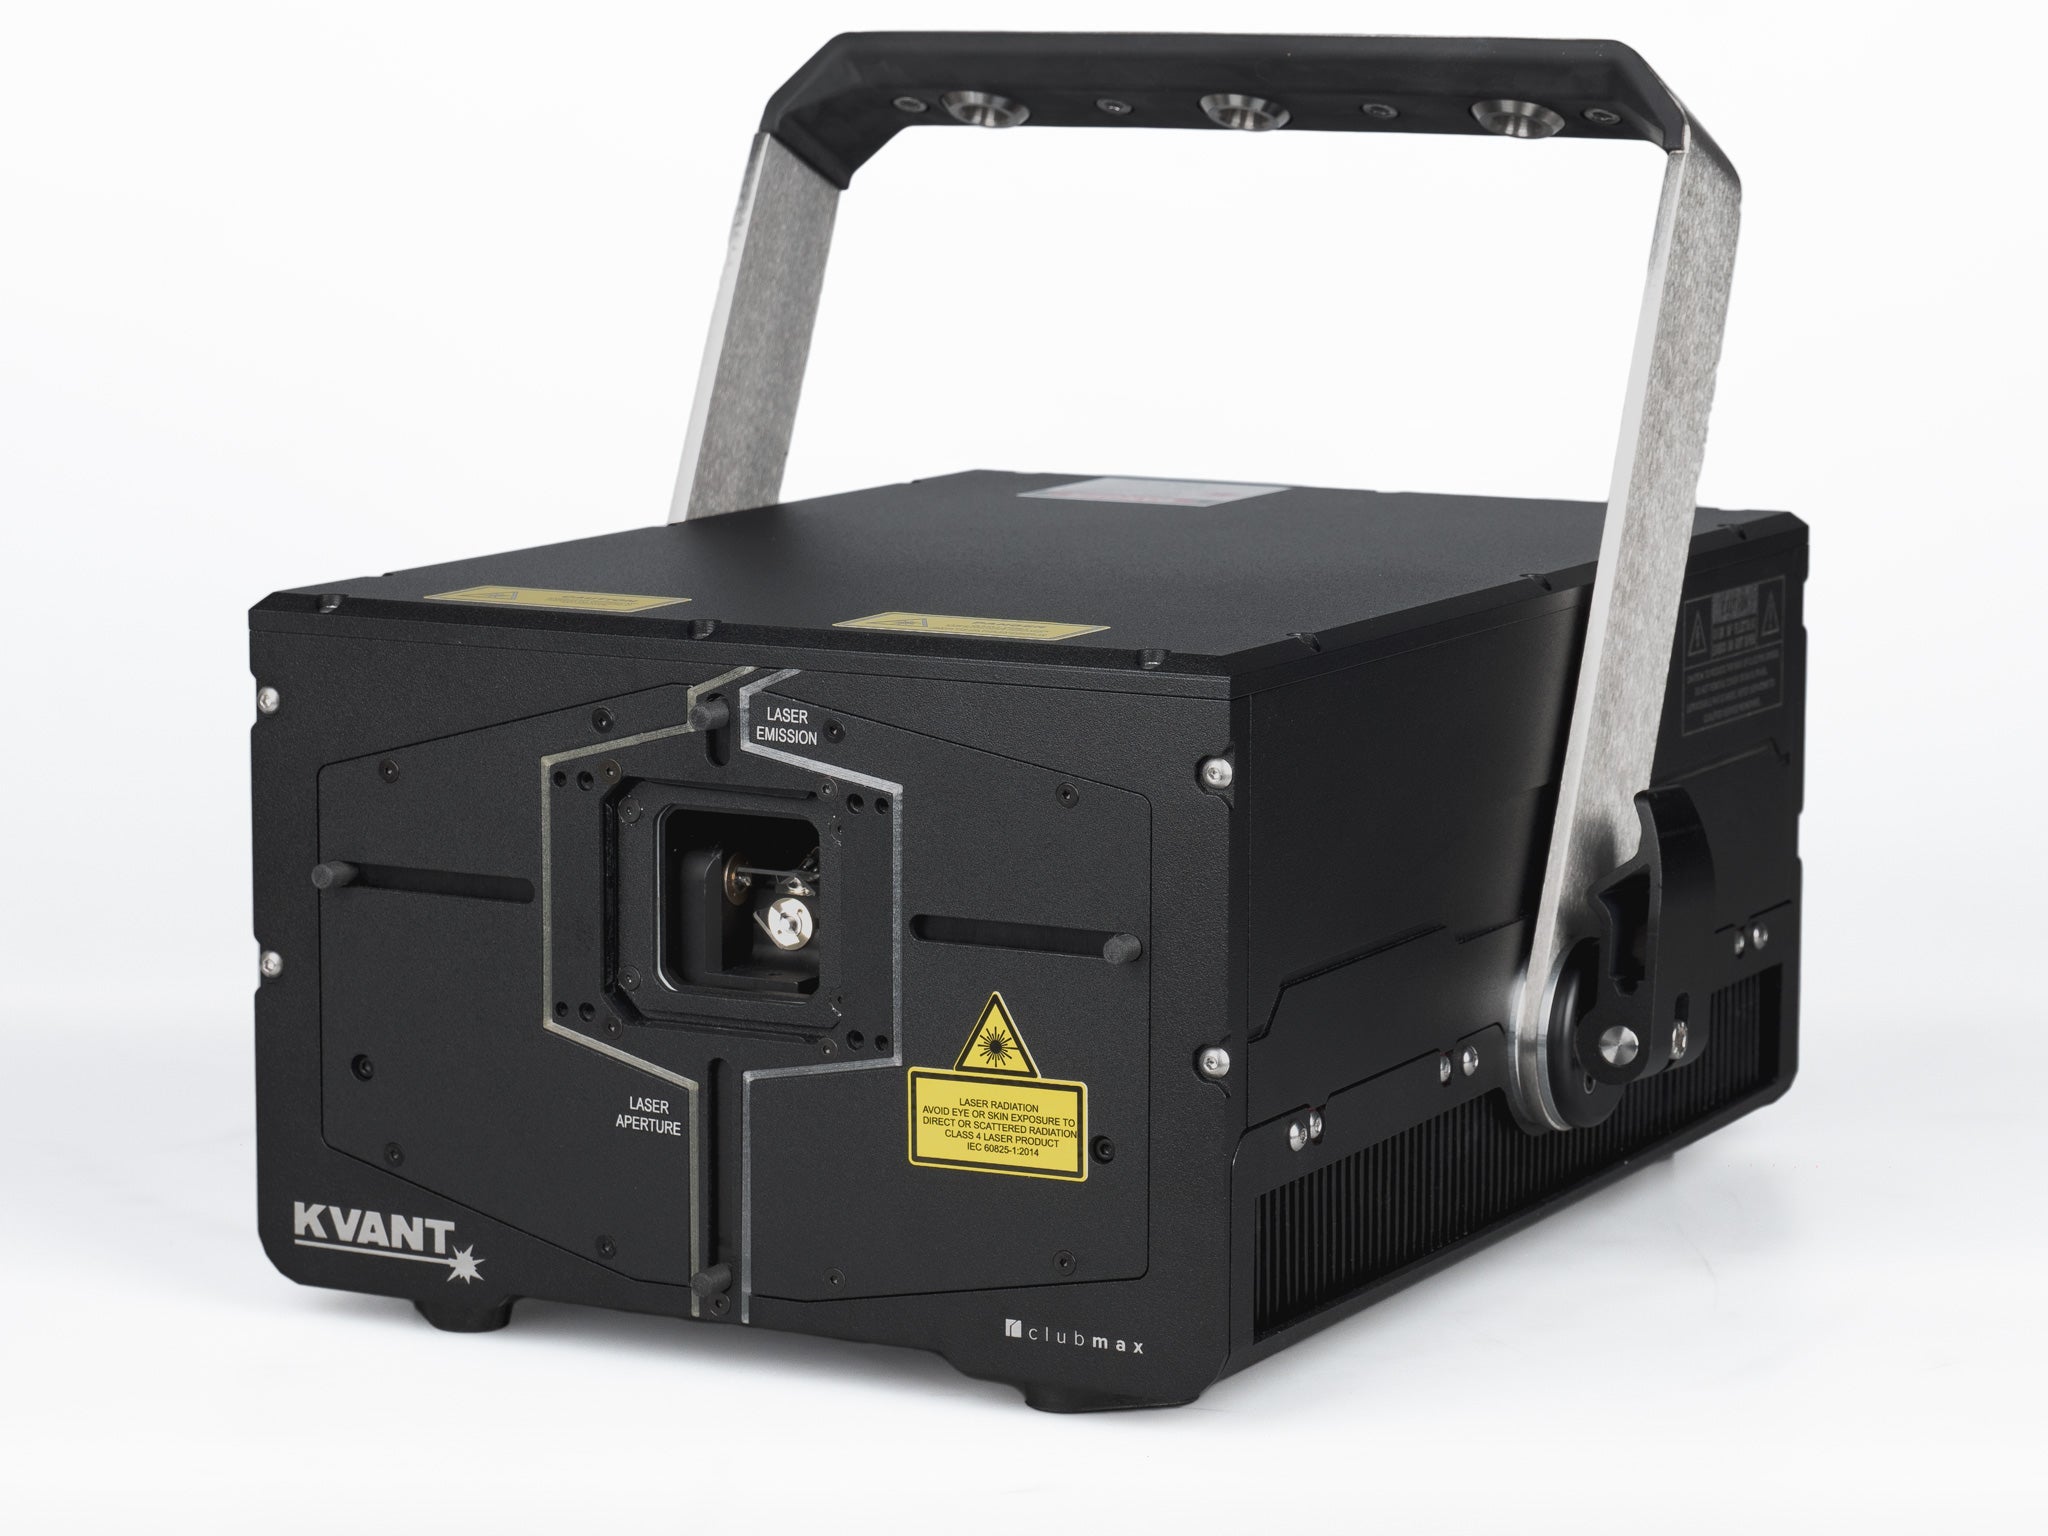 KVANT Clubmax 24 FB4 IP65 waterproof professional laser projector for outdoor shows_2